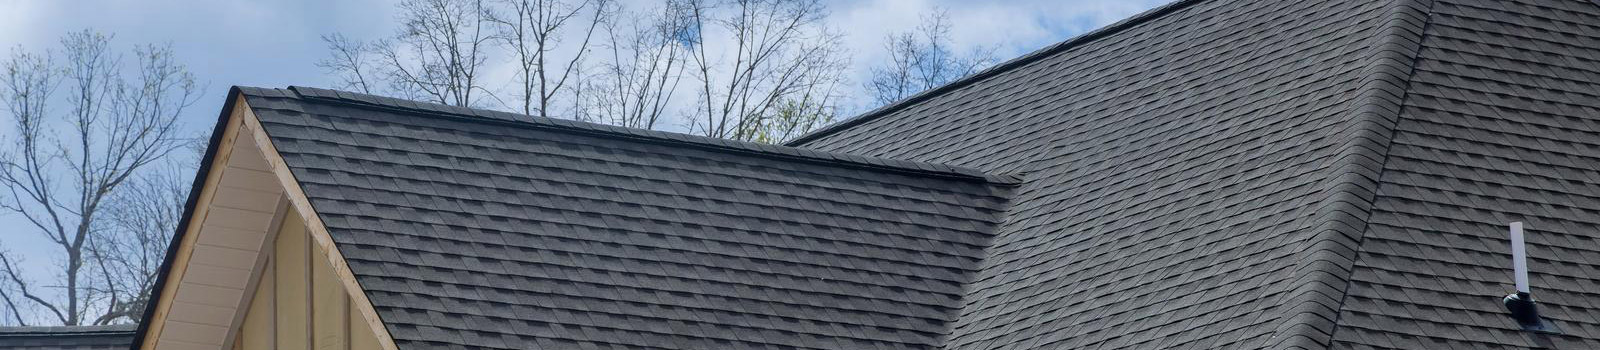 Boise roof replacement for shingle roofs, metal roofing or tile roof jobs in Idaho.